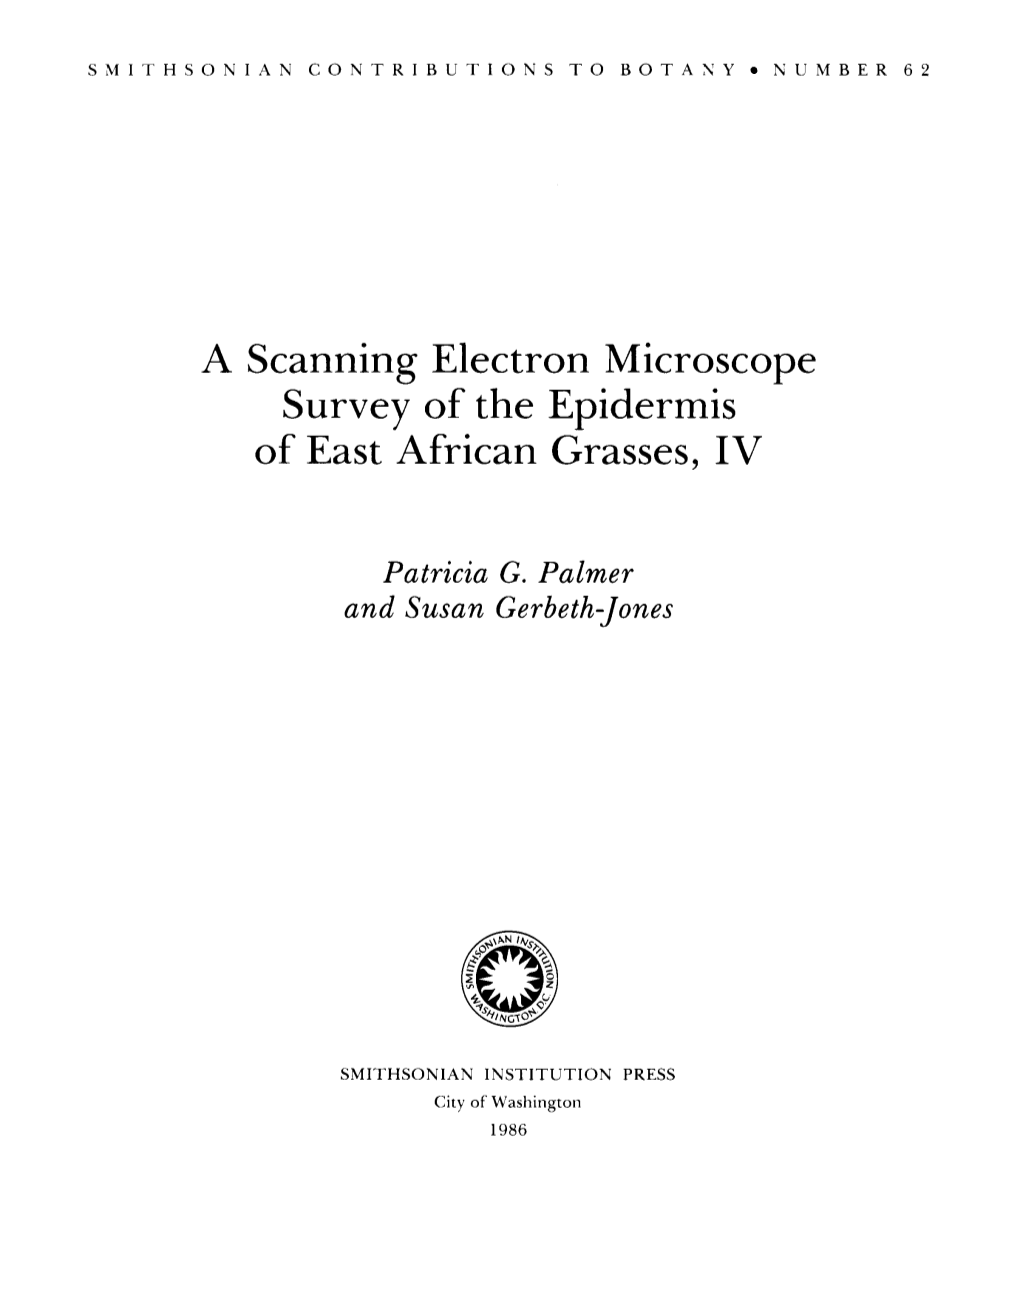 A Scanning Electron Microscope Survey of the Epidermis of East African Grasses, IV